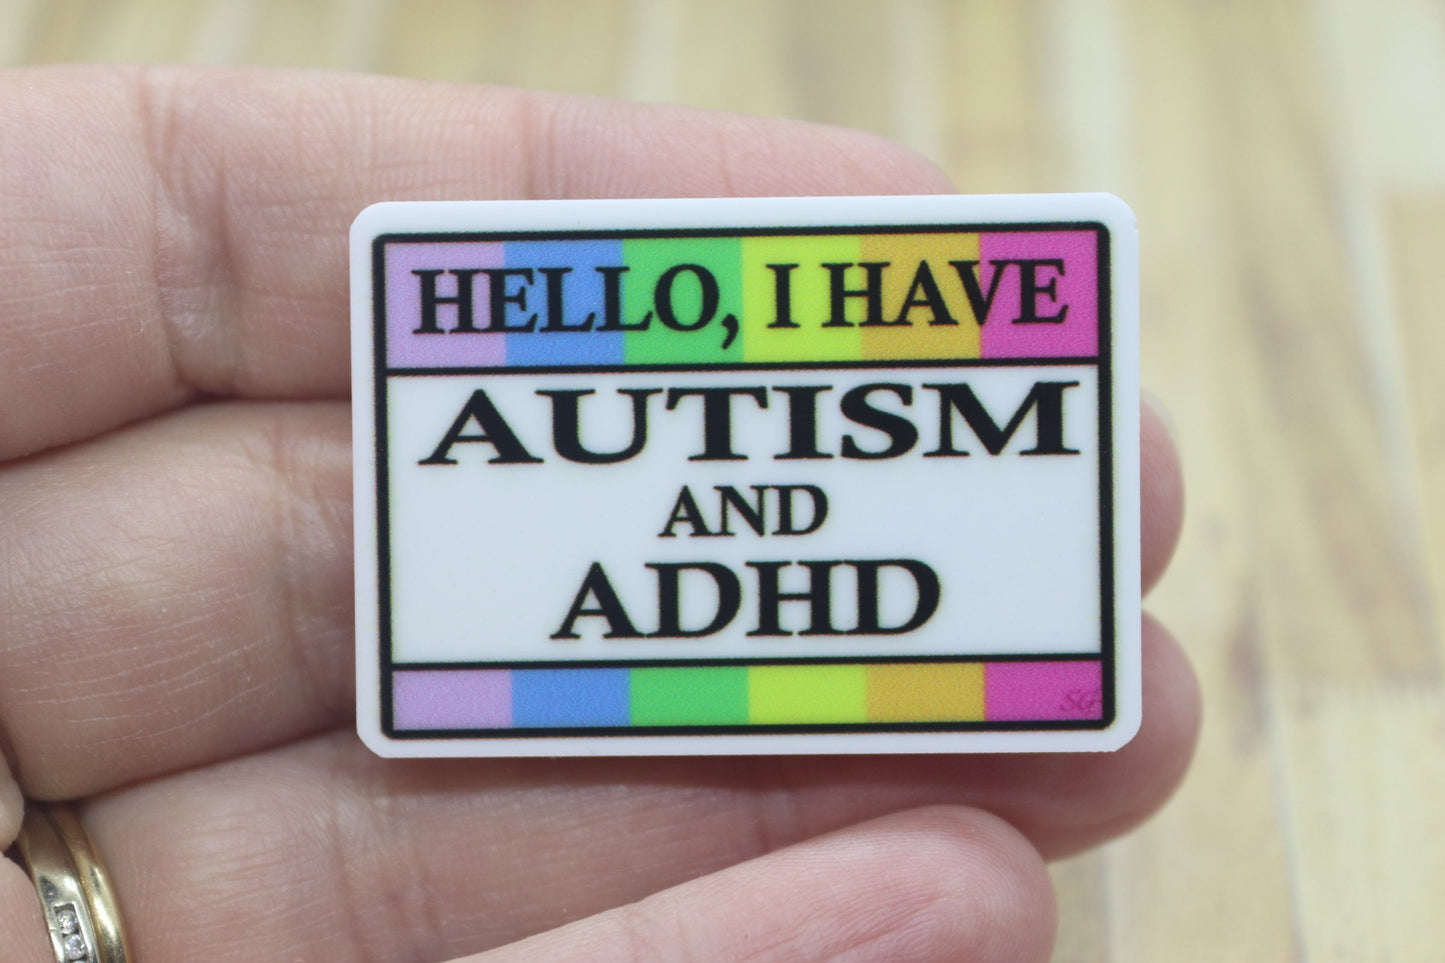 Hello, I Have Autism and ADHD Medical Badge